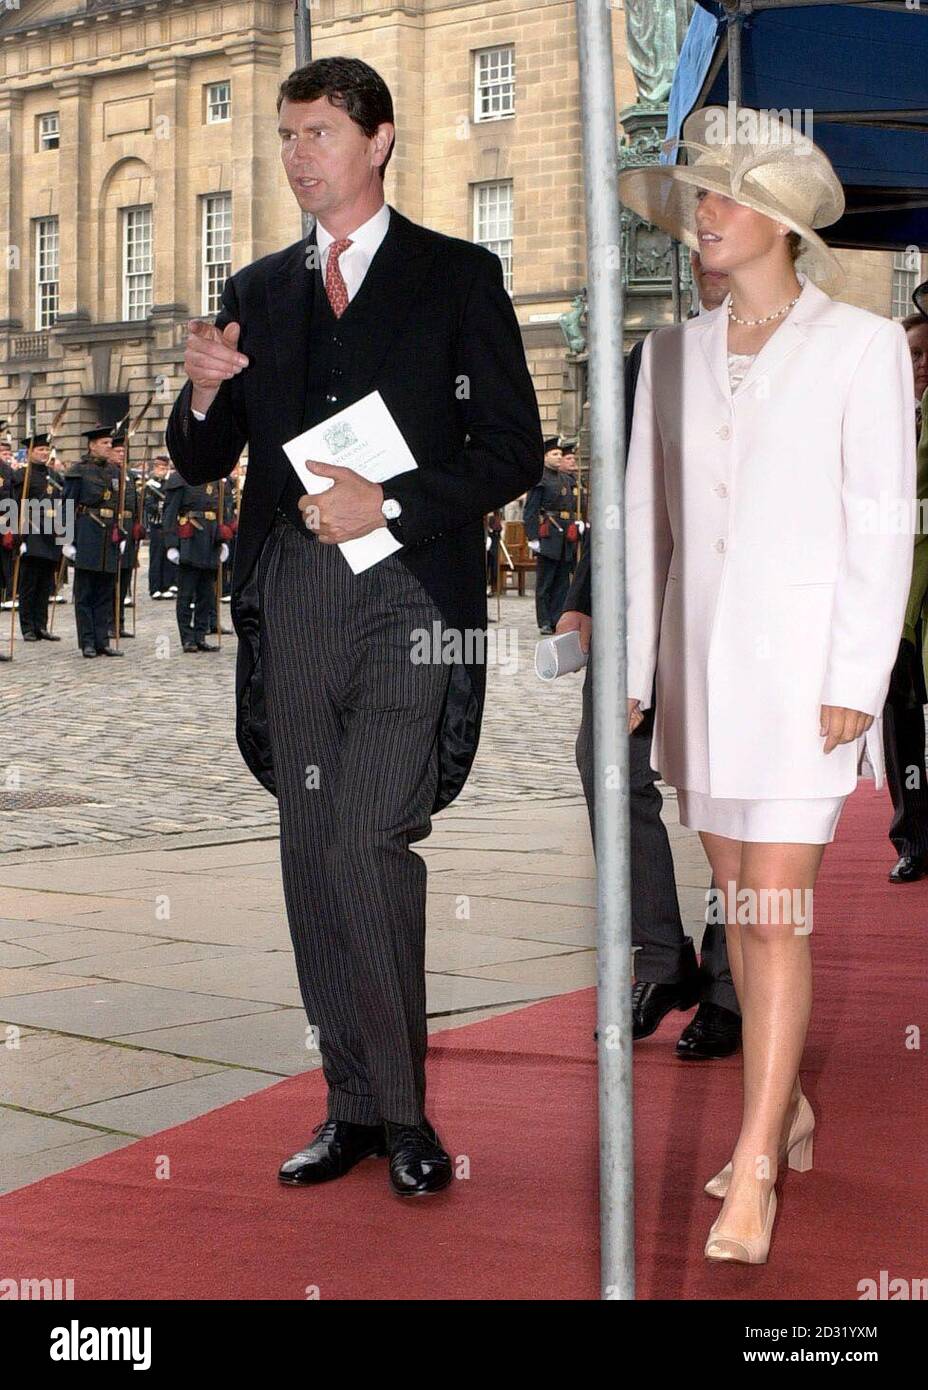 The Princess Royal's husband Tim Laurence with step-daughter Zara Phillips  leaving St Giles Cathedral in Edinburgh, where the Princess Royal was  installed as a Royal Lady and Knight of the Order of